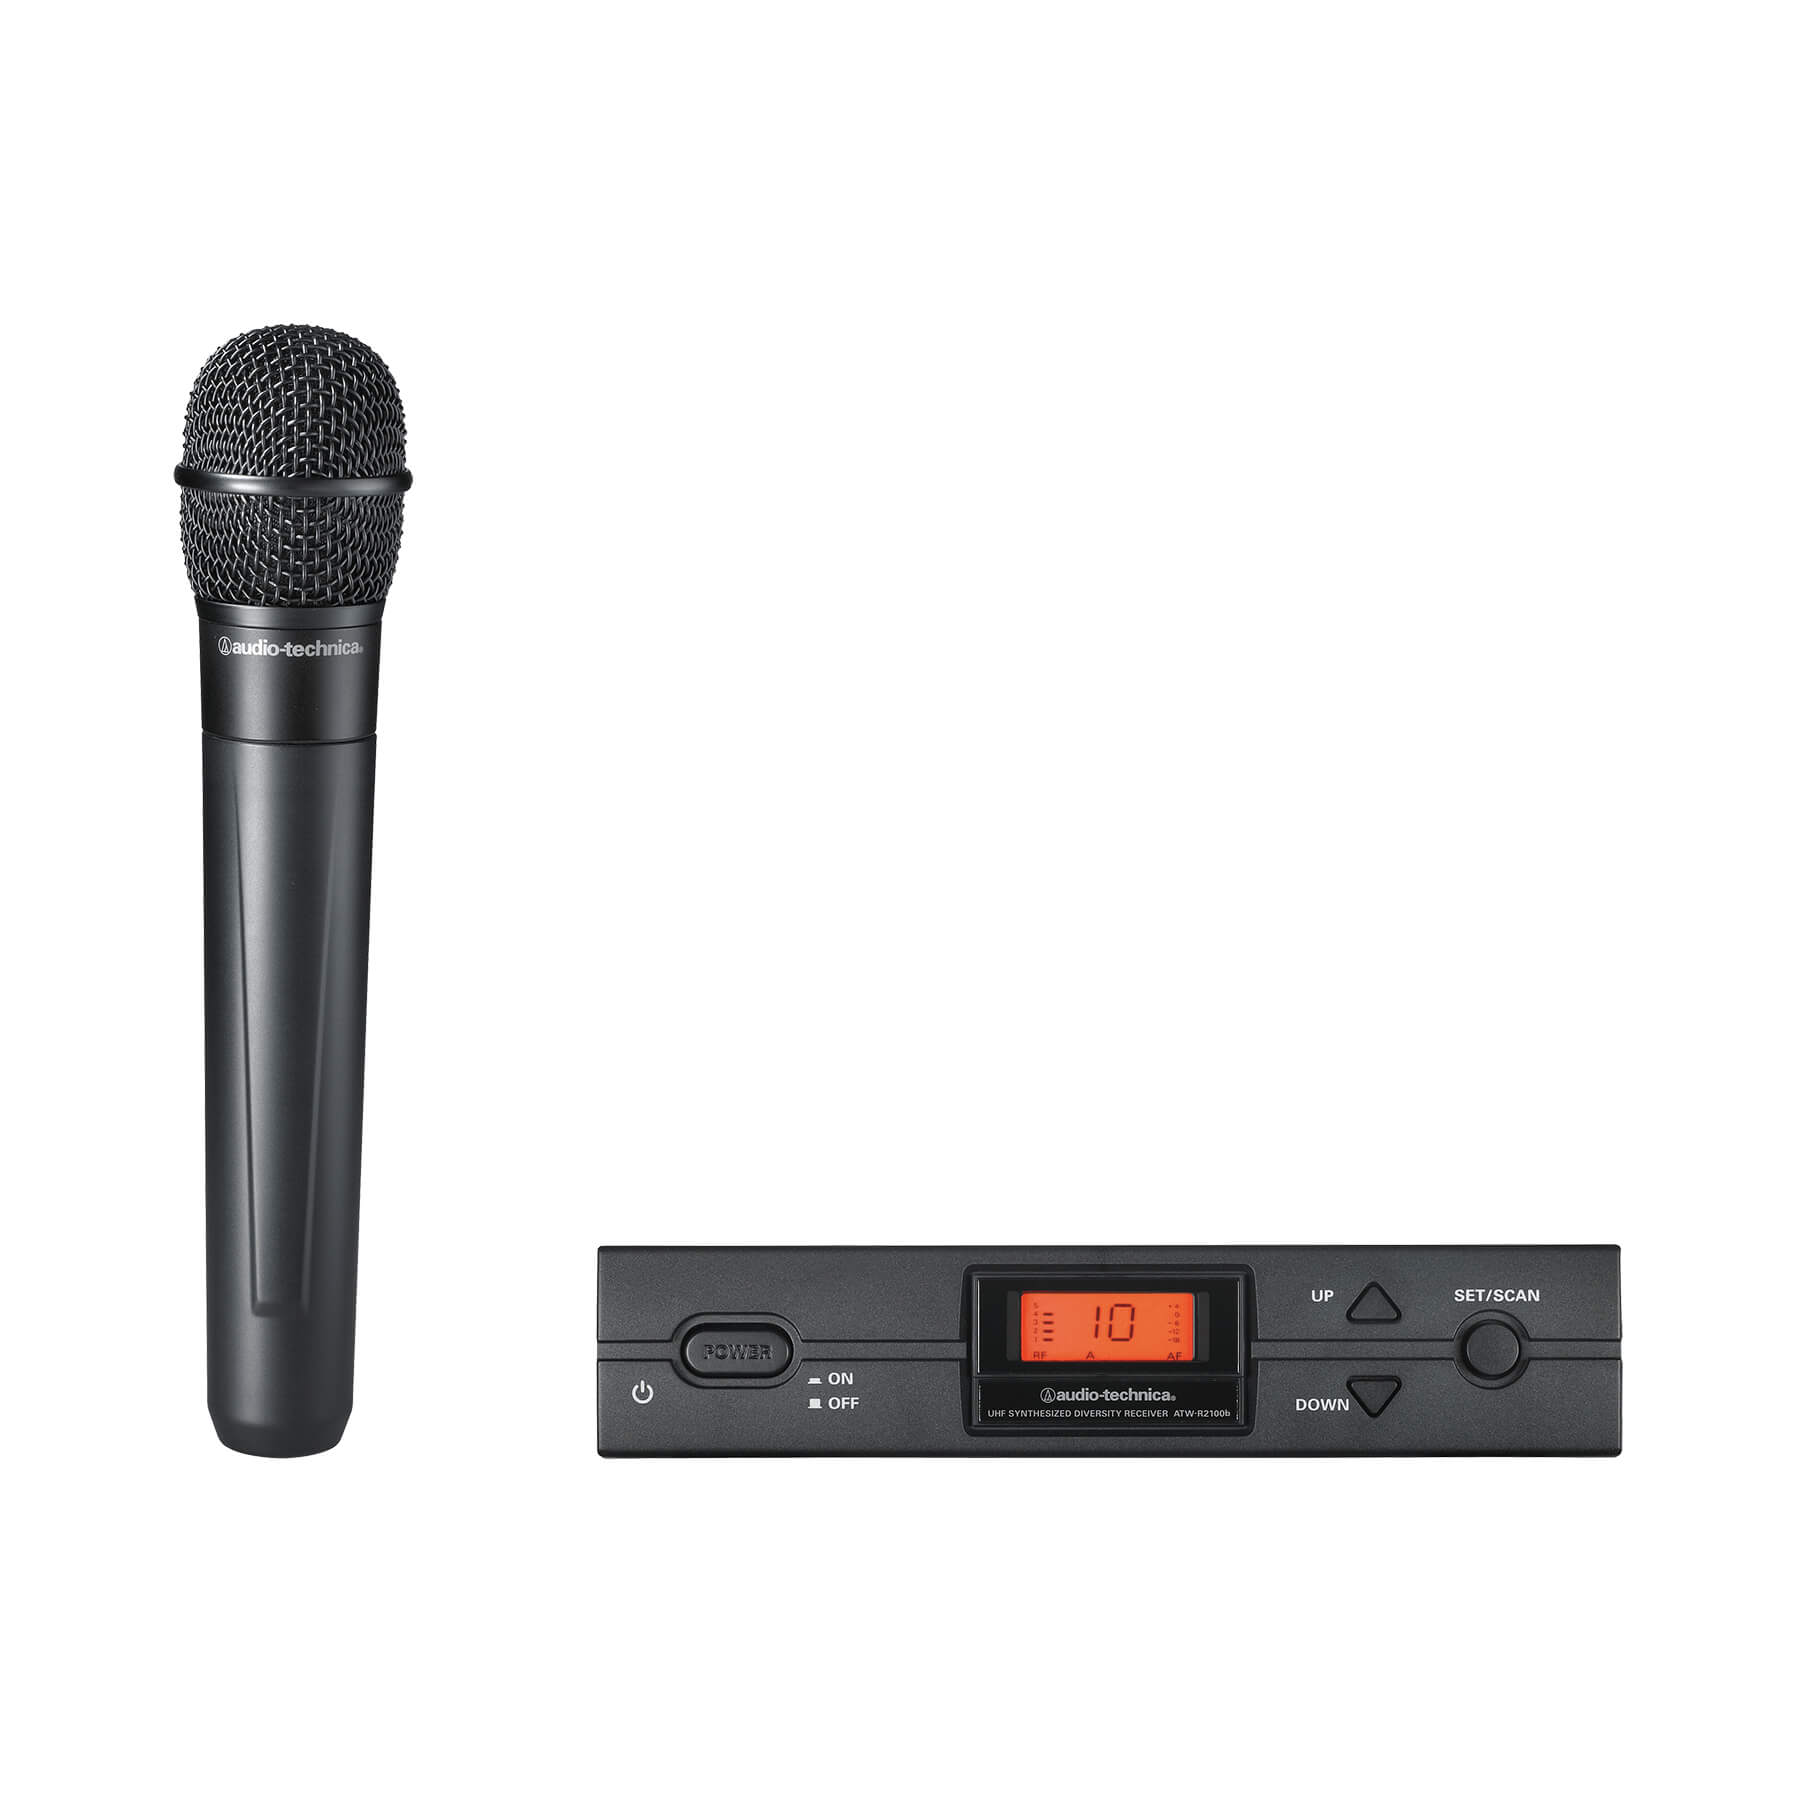 Wireless microphone system Electronics at